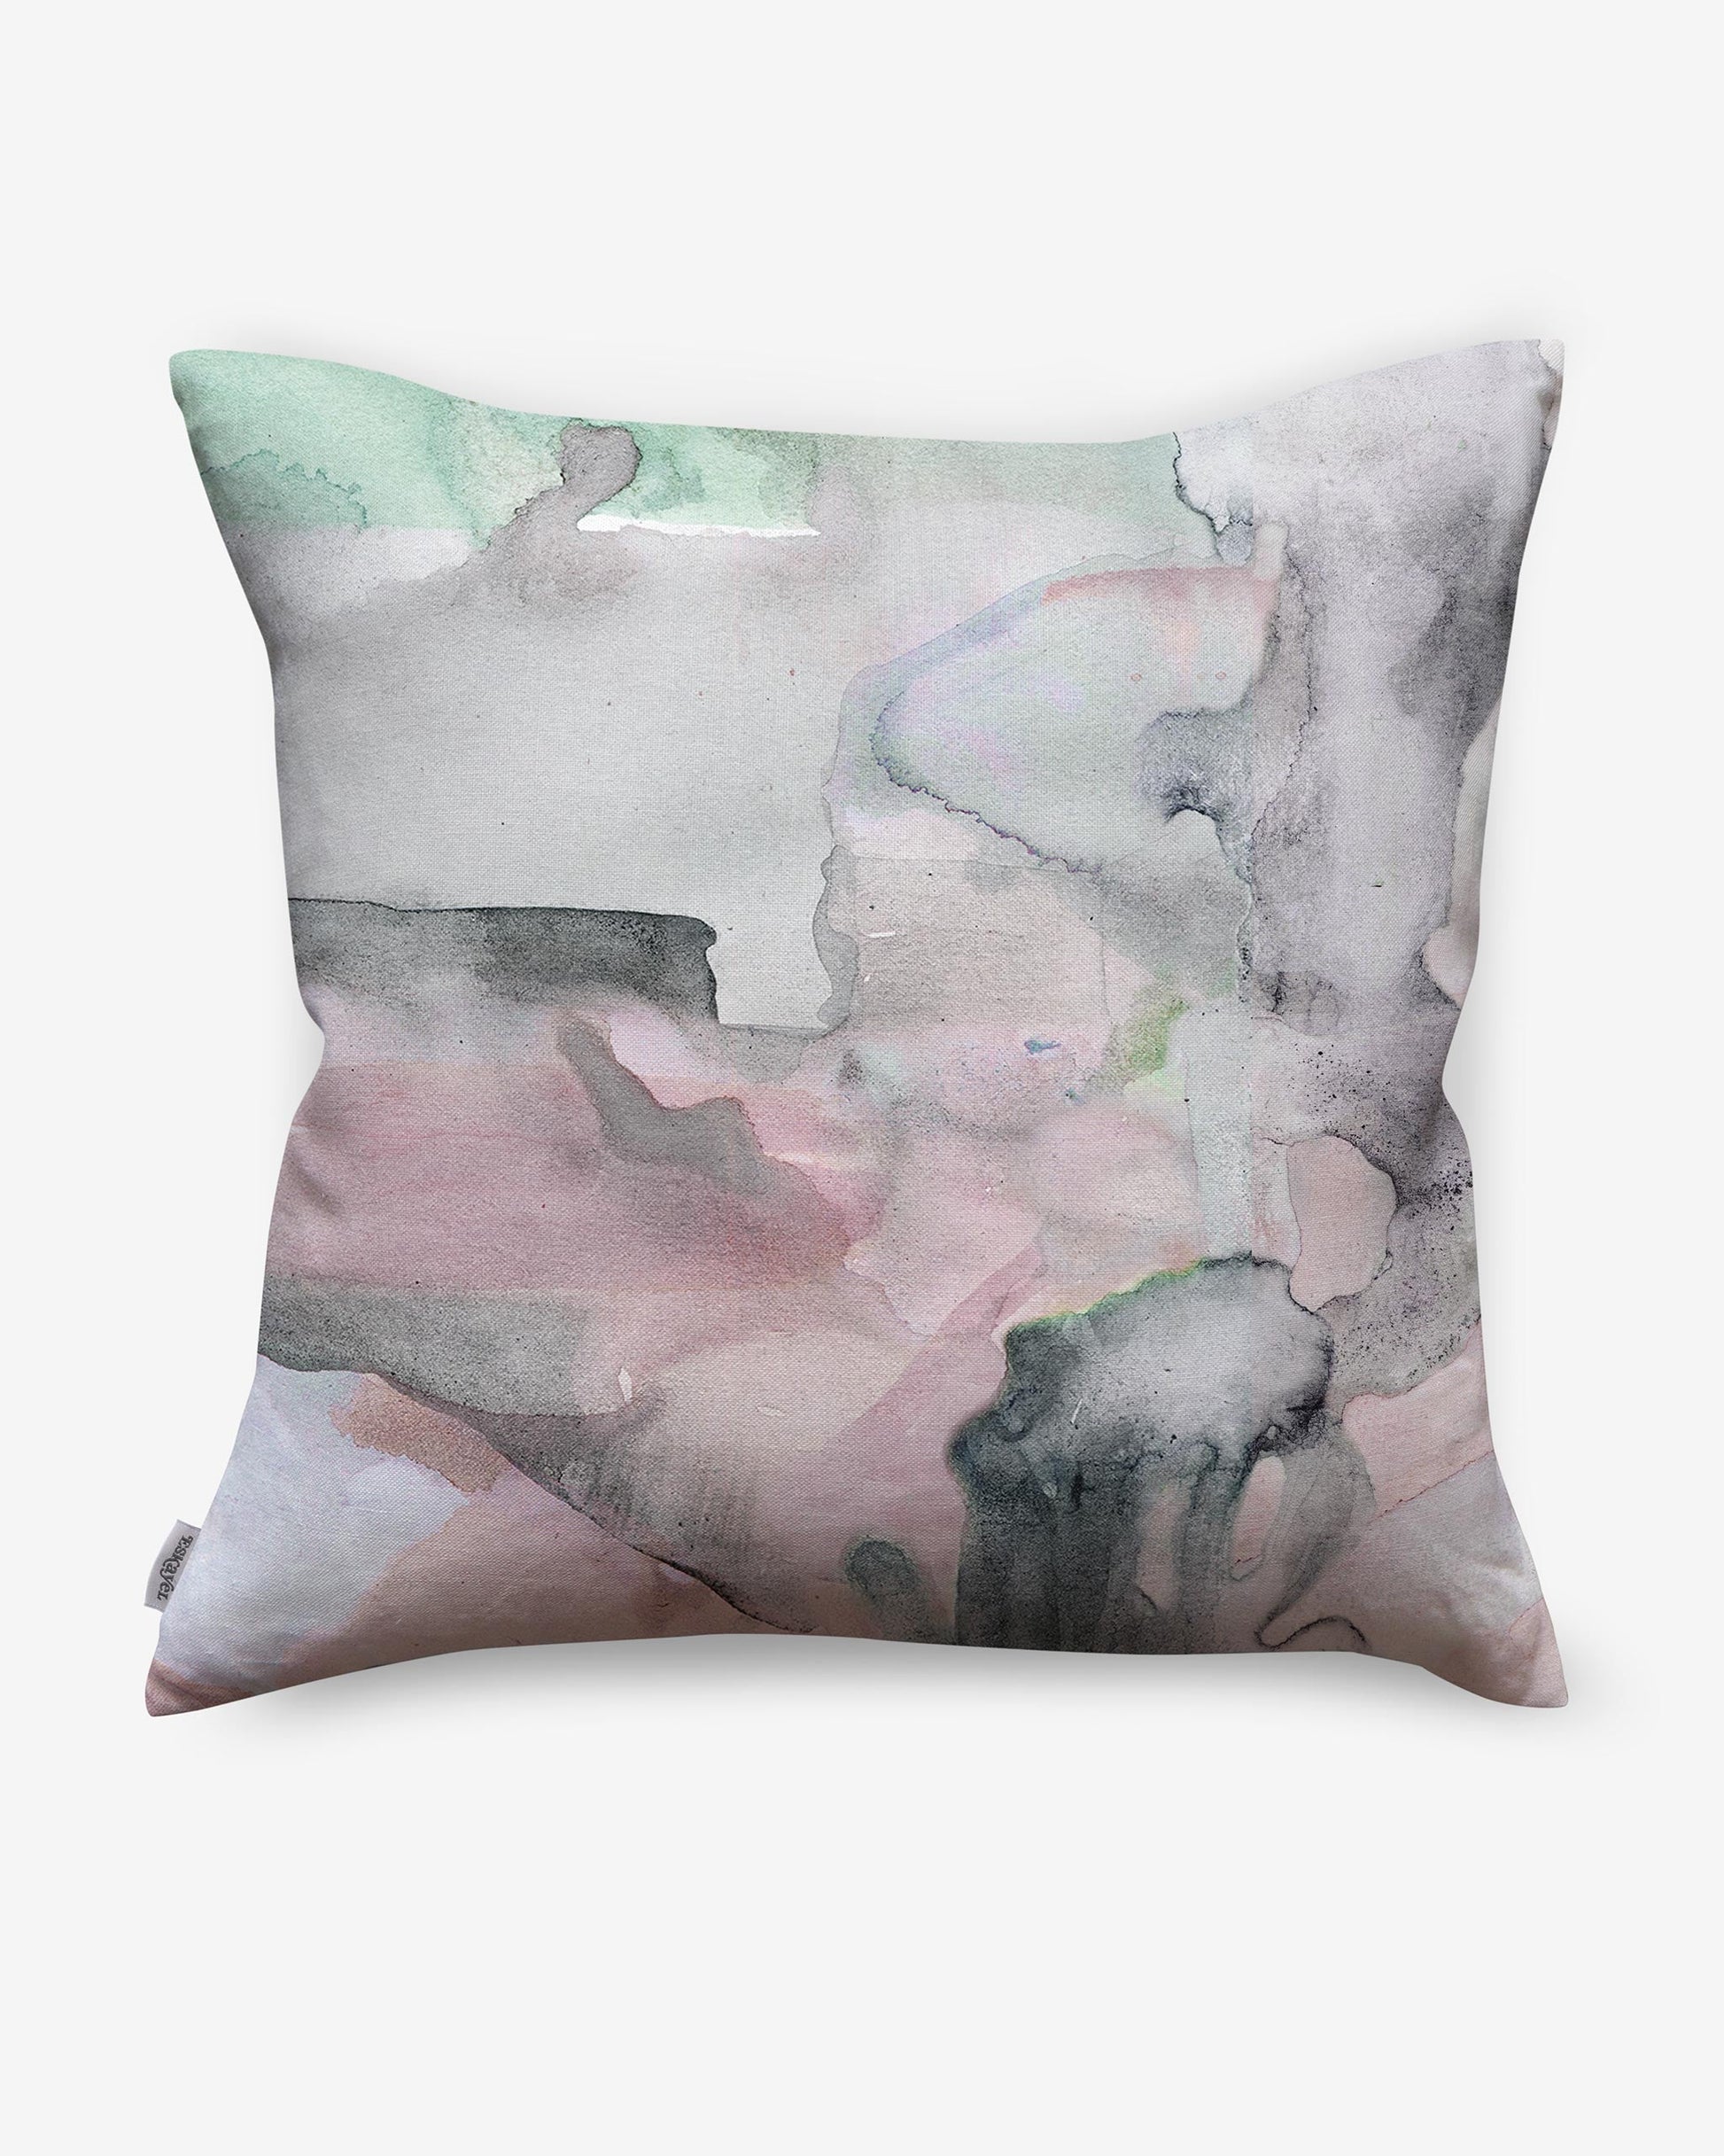 A luxury fabric Palmeraie Pillow with a watercolor painting in Marrakech